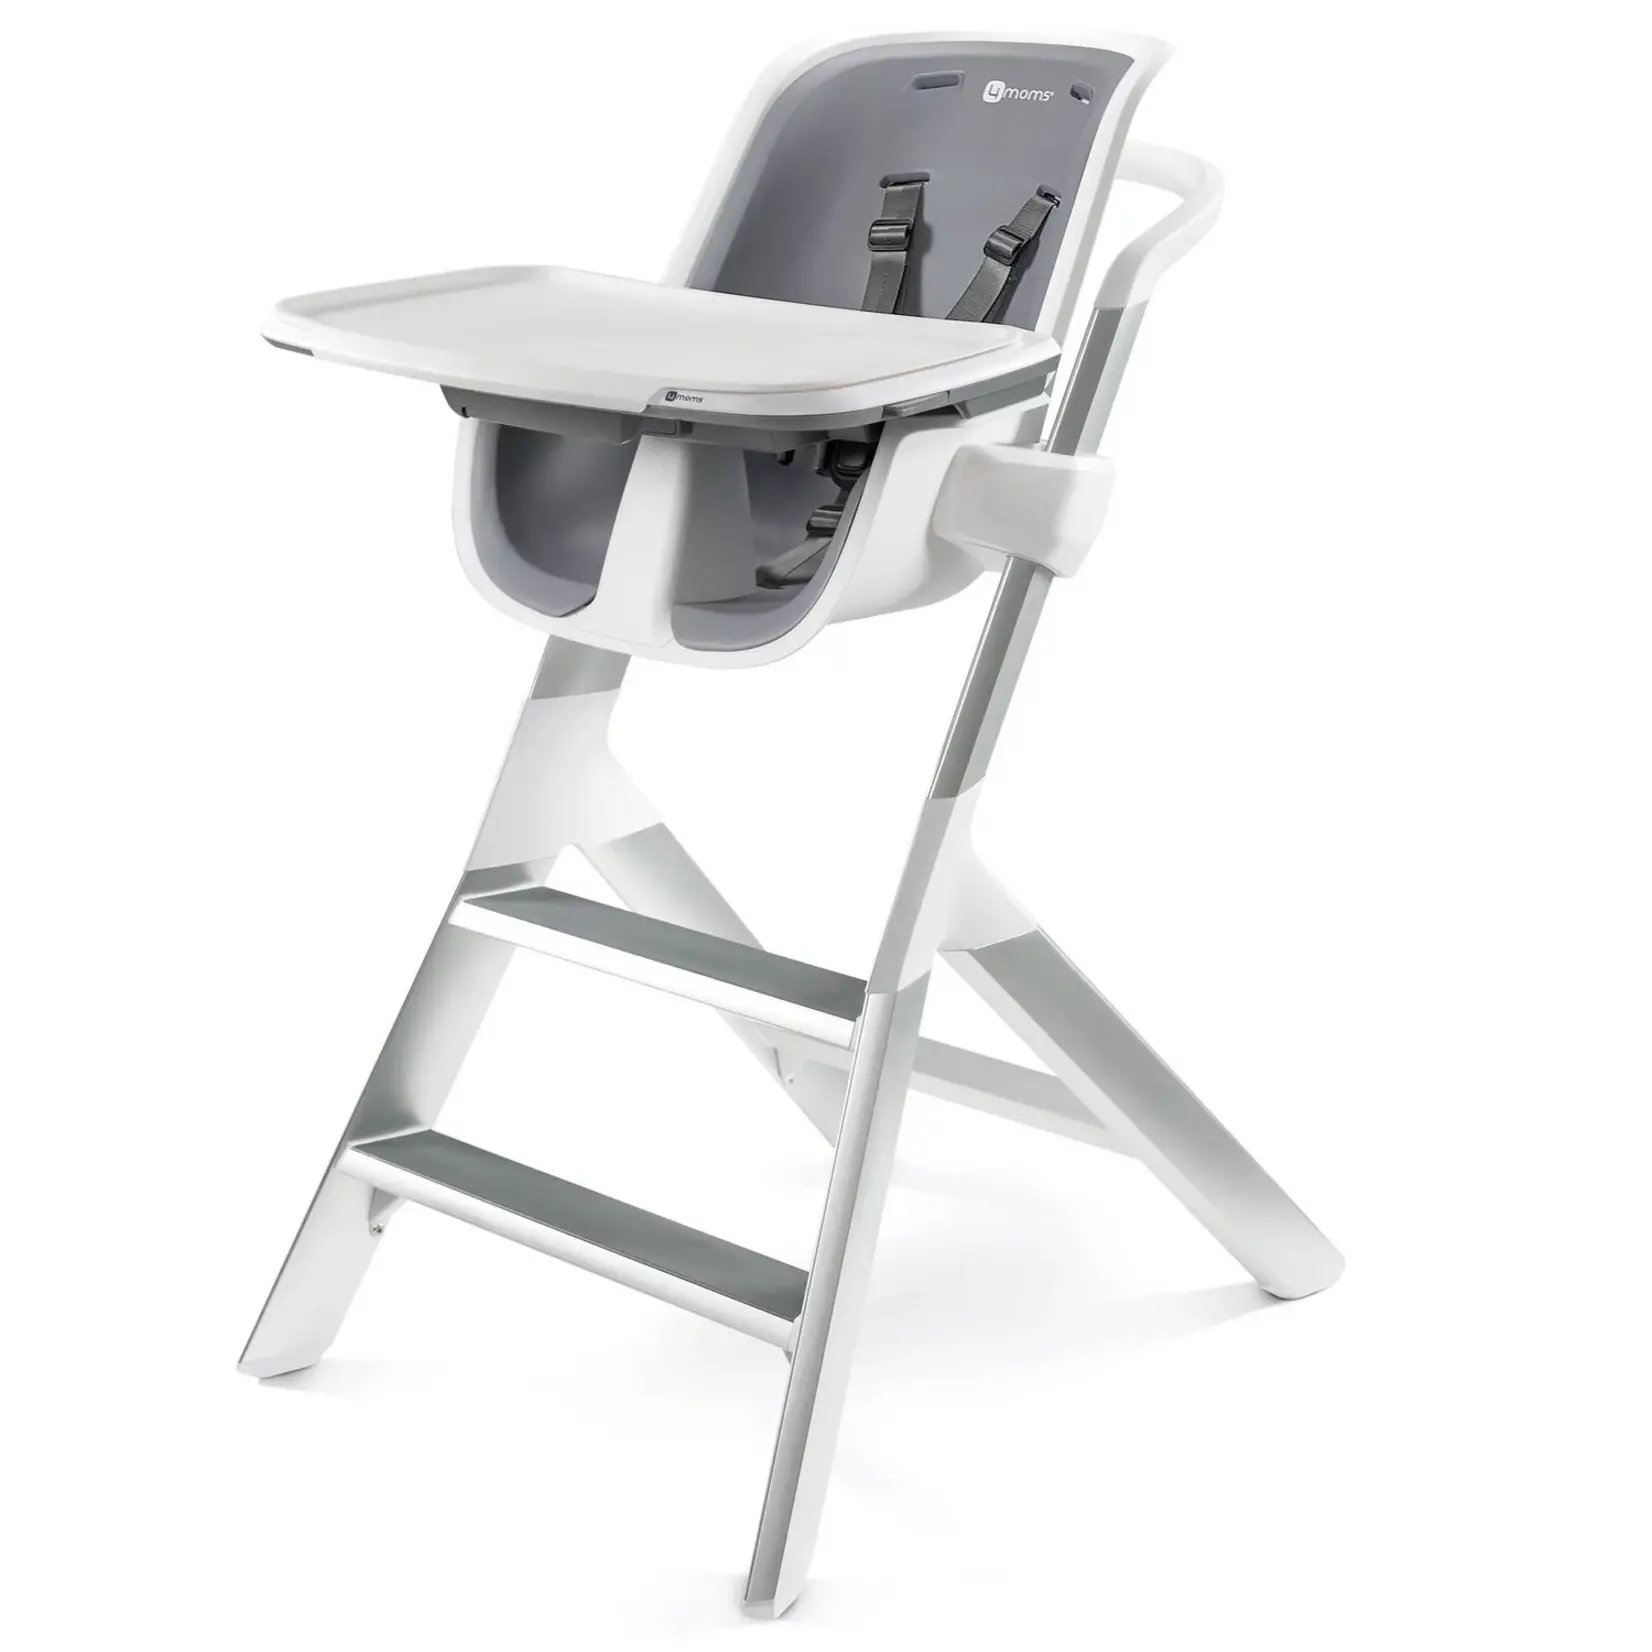 4Moms 4MOMS MAGNETIC HIGH CHAIR